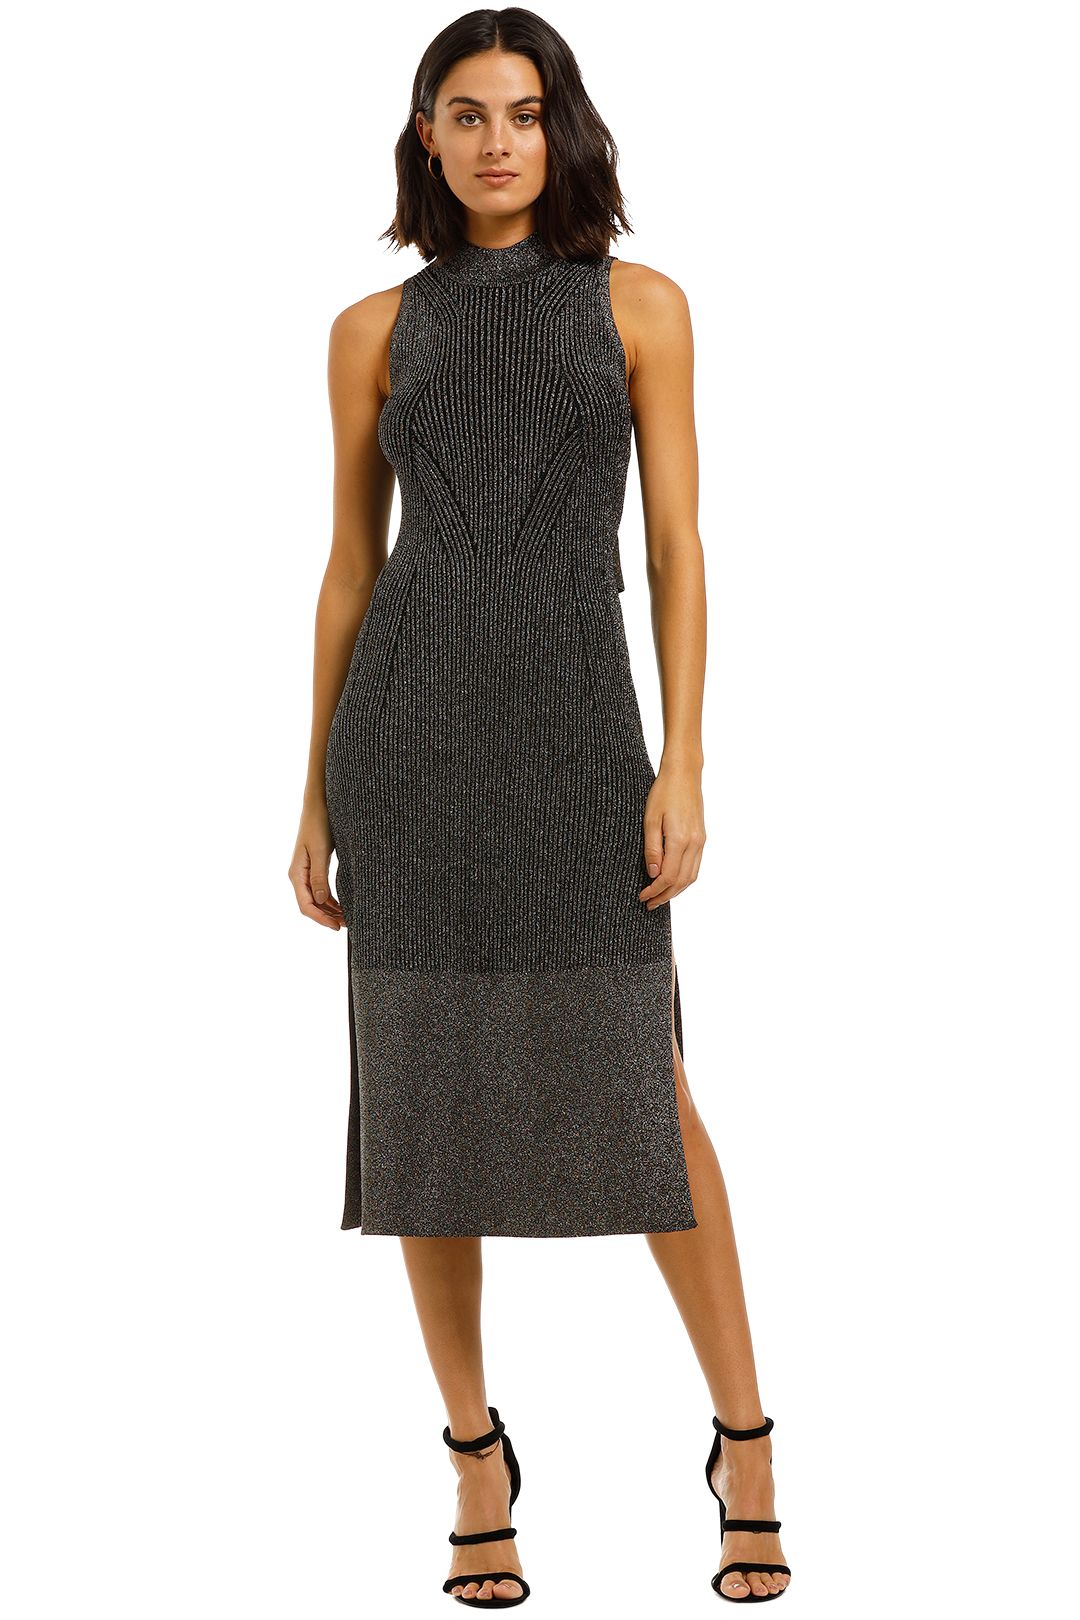 Camilla-and-Marc-Perry-Dress-Gunmetal-Front